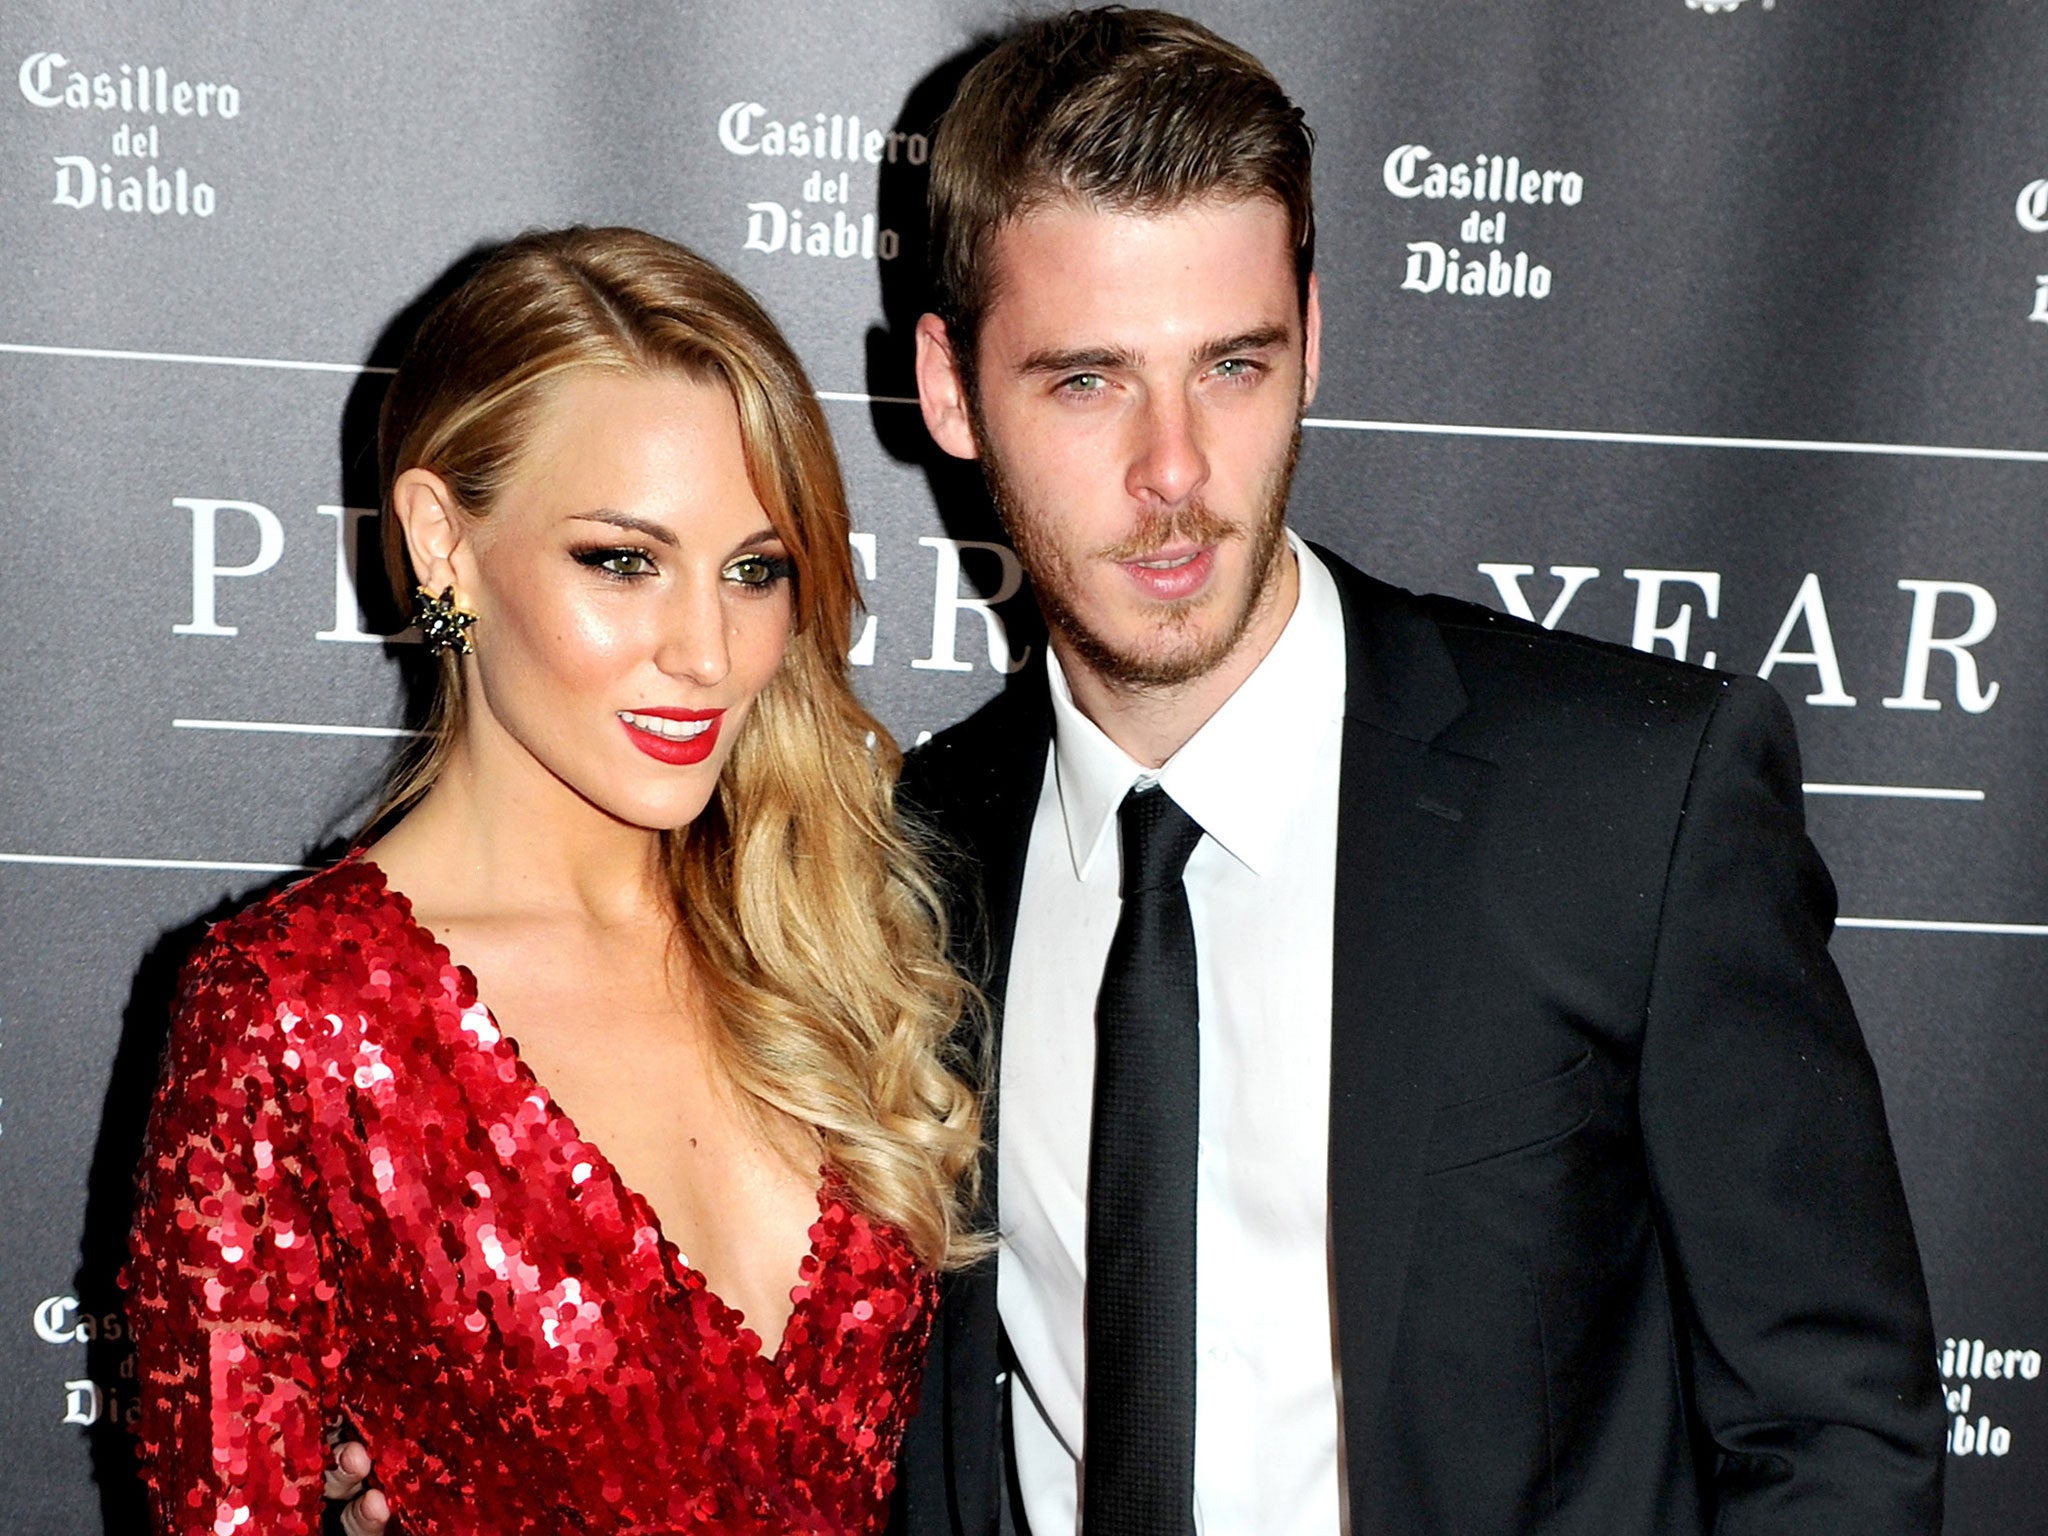 Edurne Garcia and David De Gea attend the Manchester United Player of the Year awards at Old Trafford last May